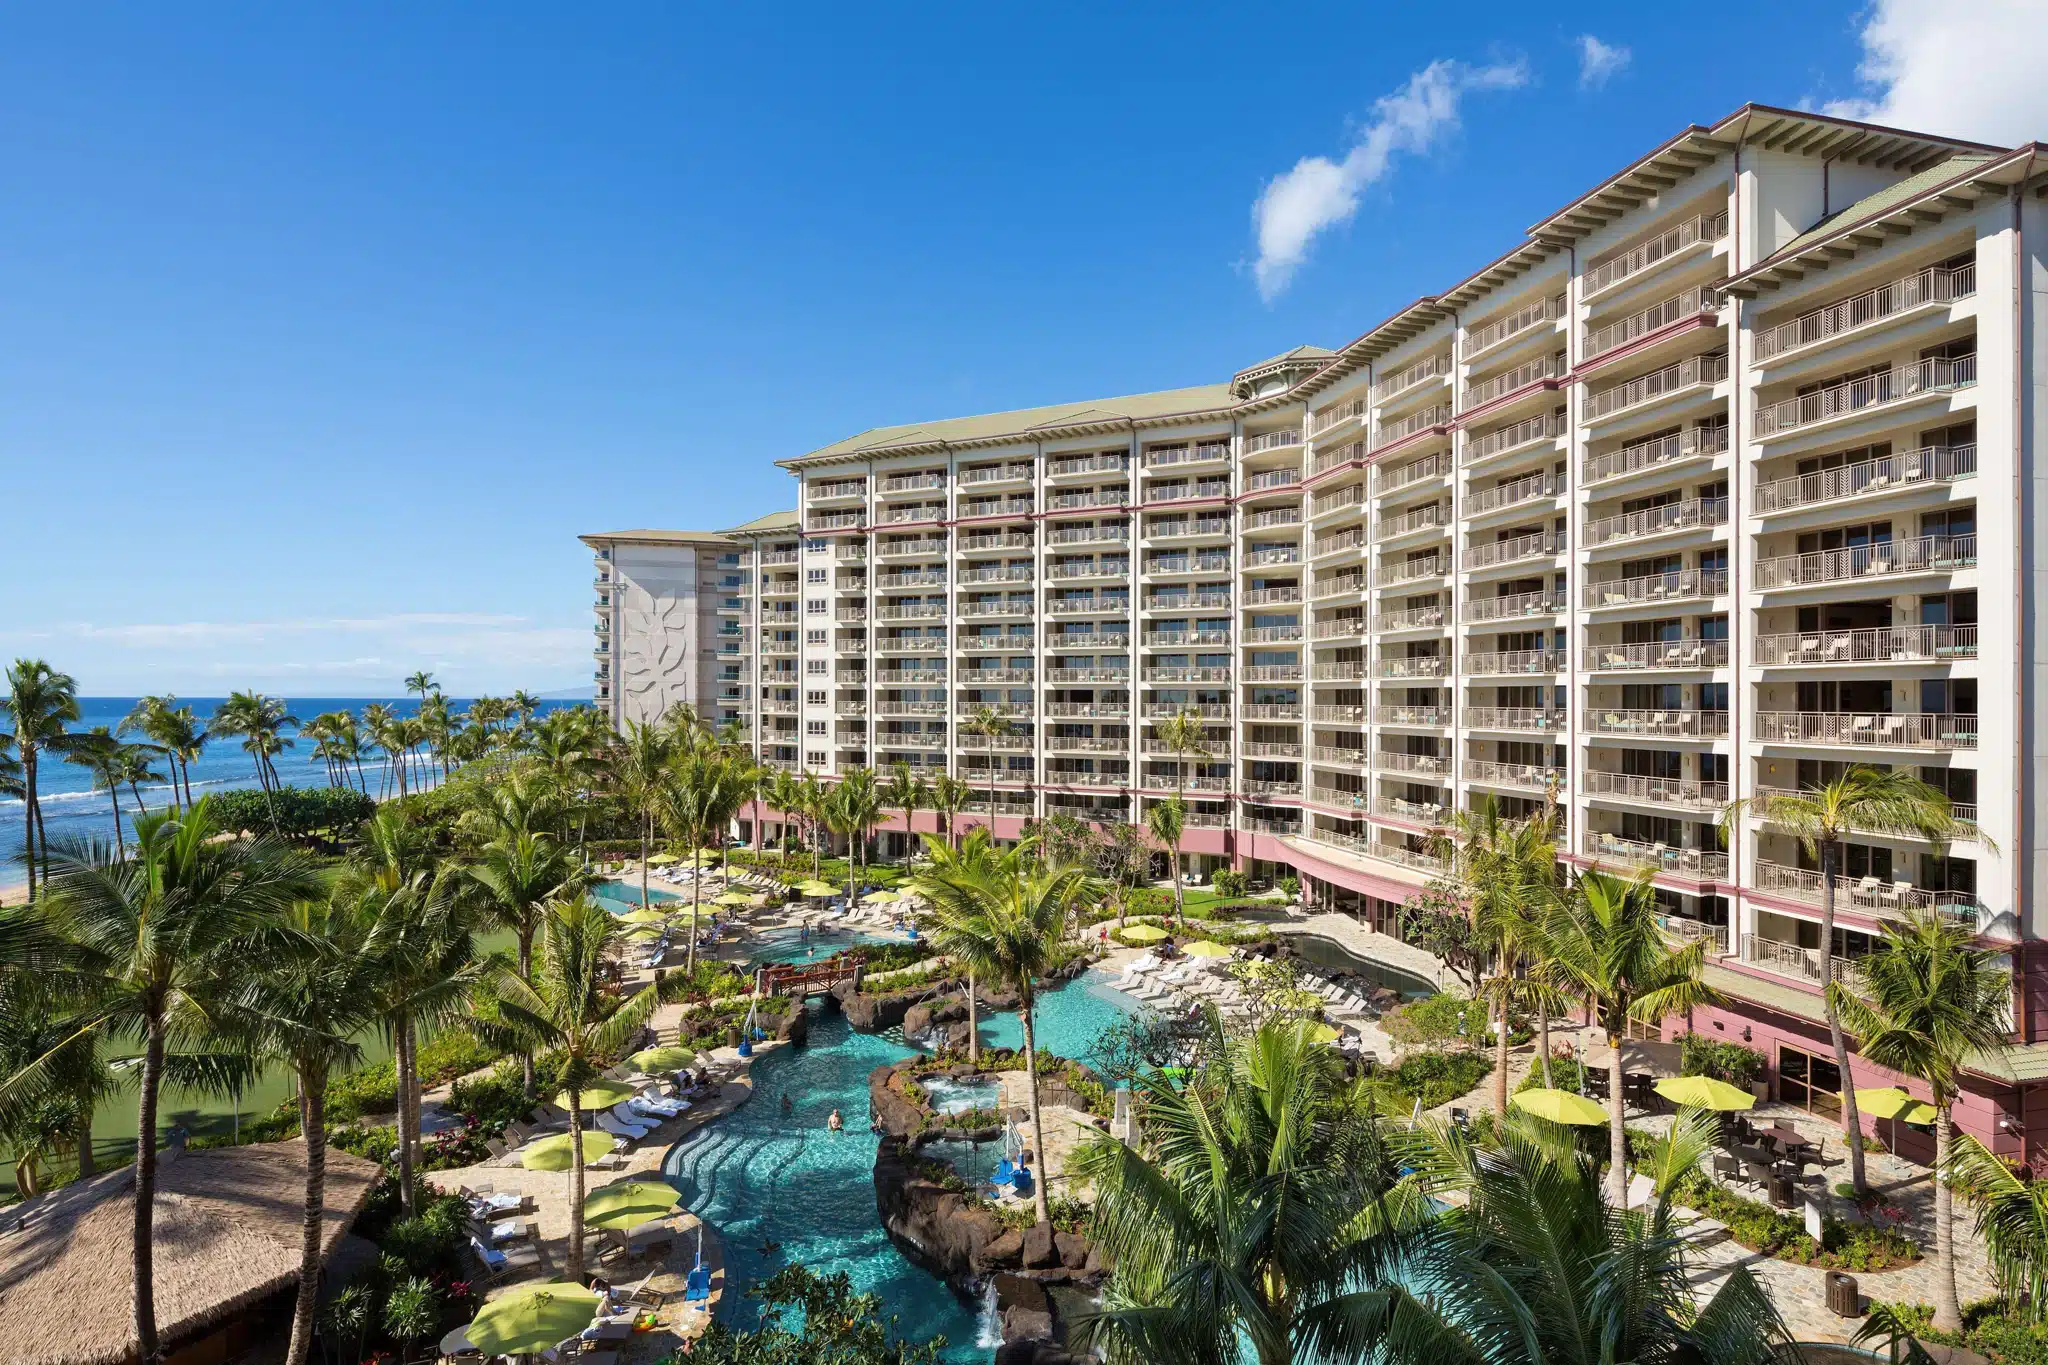 Hyatt Residence Club is a Hotel located in the city of Lahaina on Maui, Hawaii